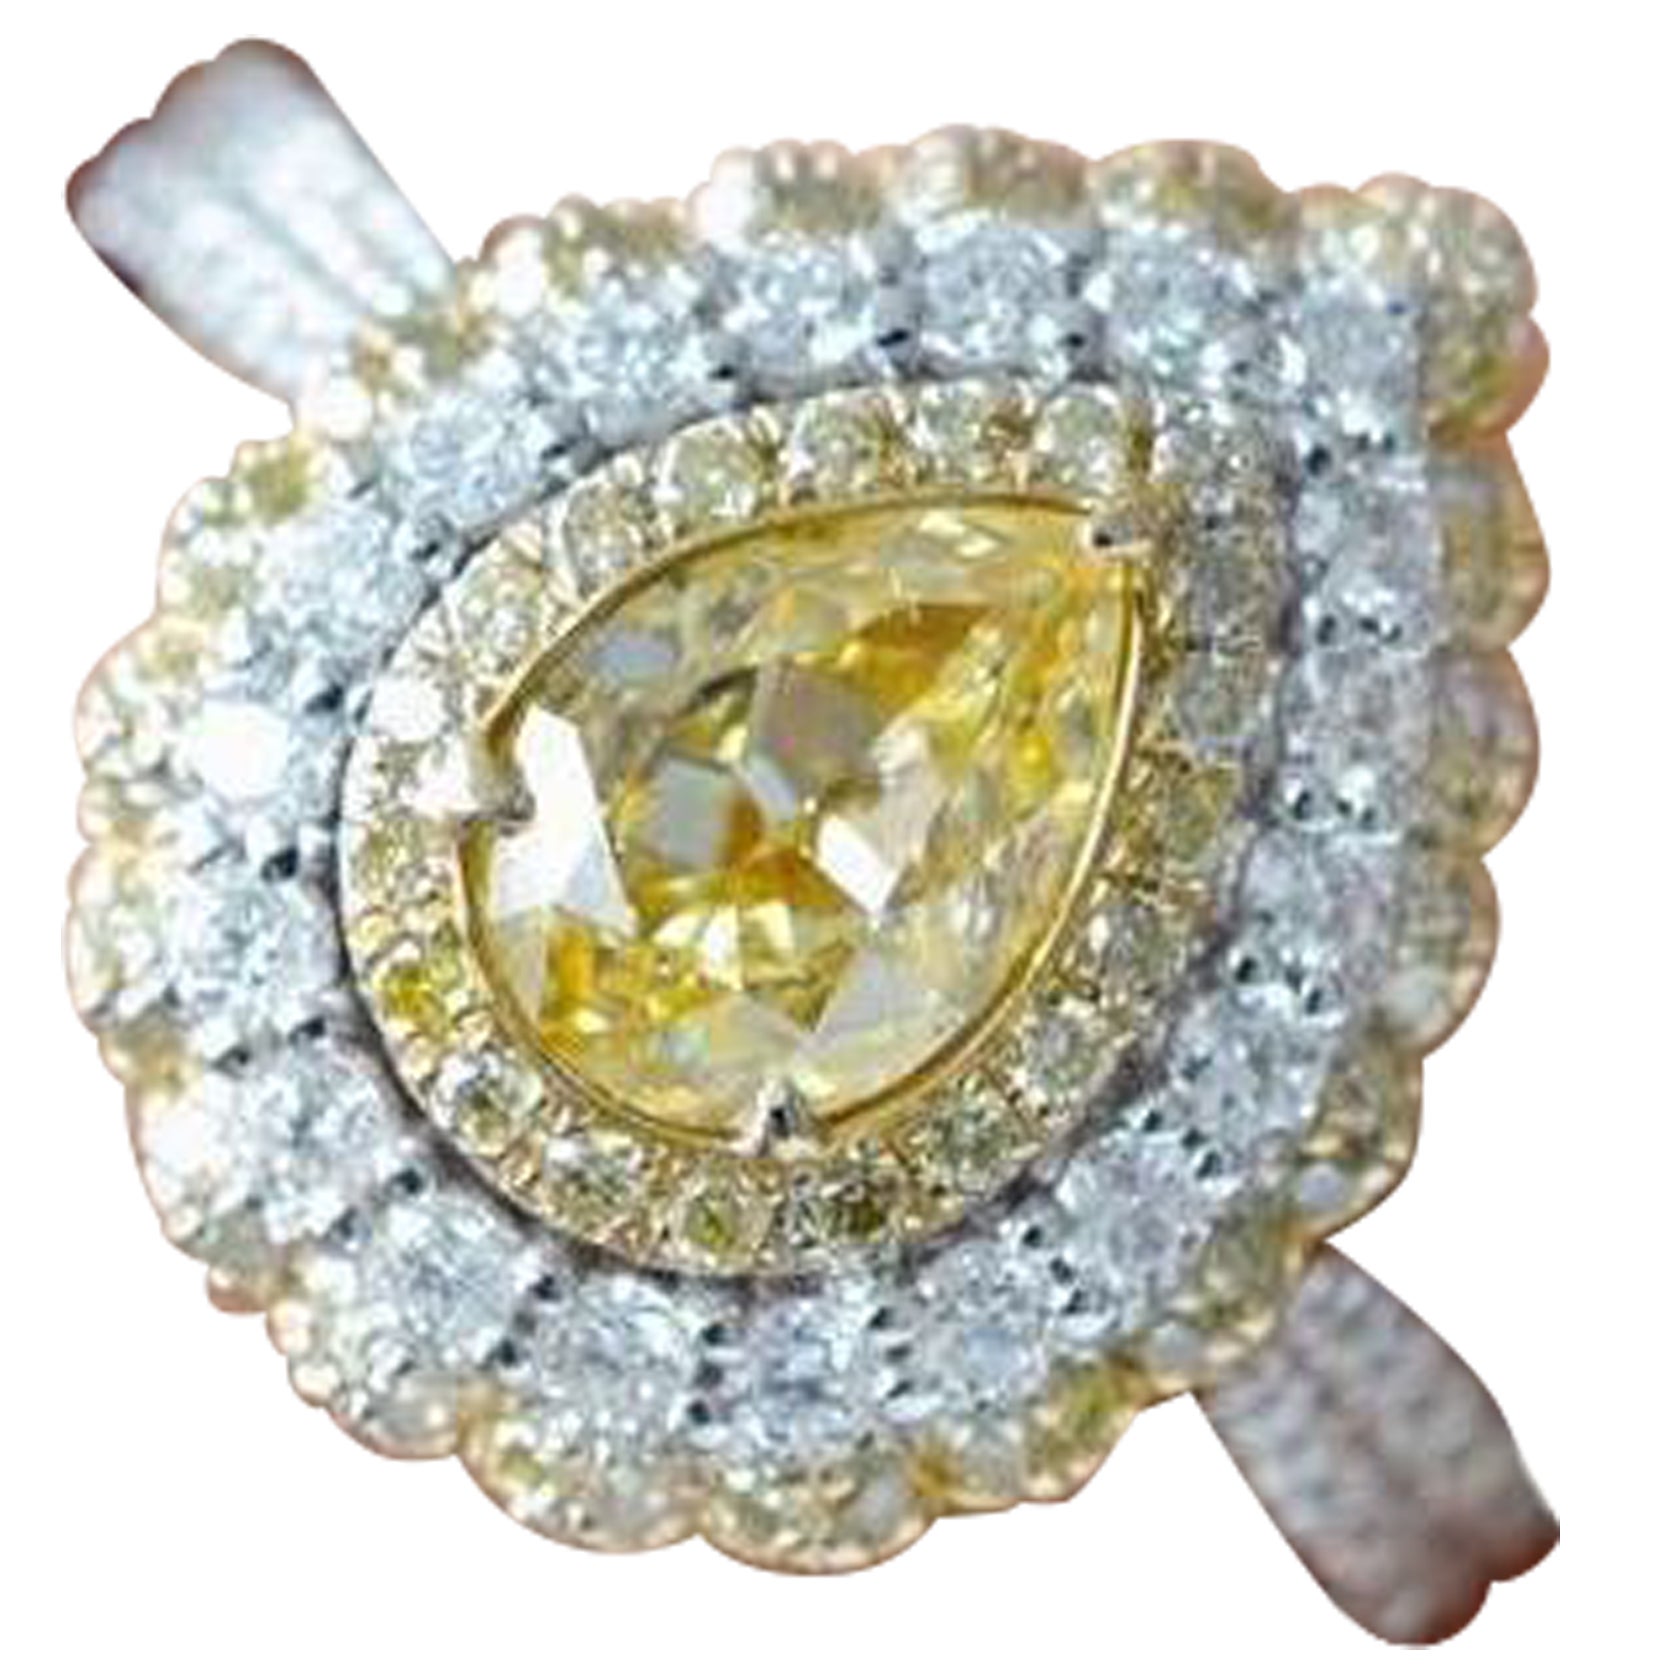 0.68 Carat Fancy Light Yellow Diamond Ring VS2 Clarity GIA Certified For Sale